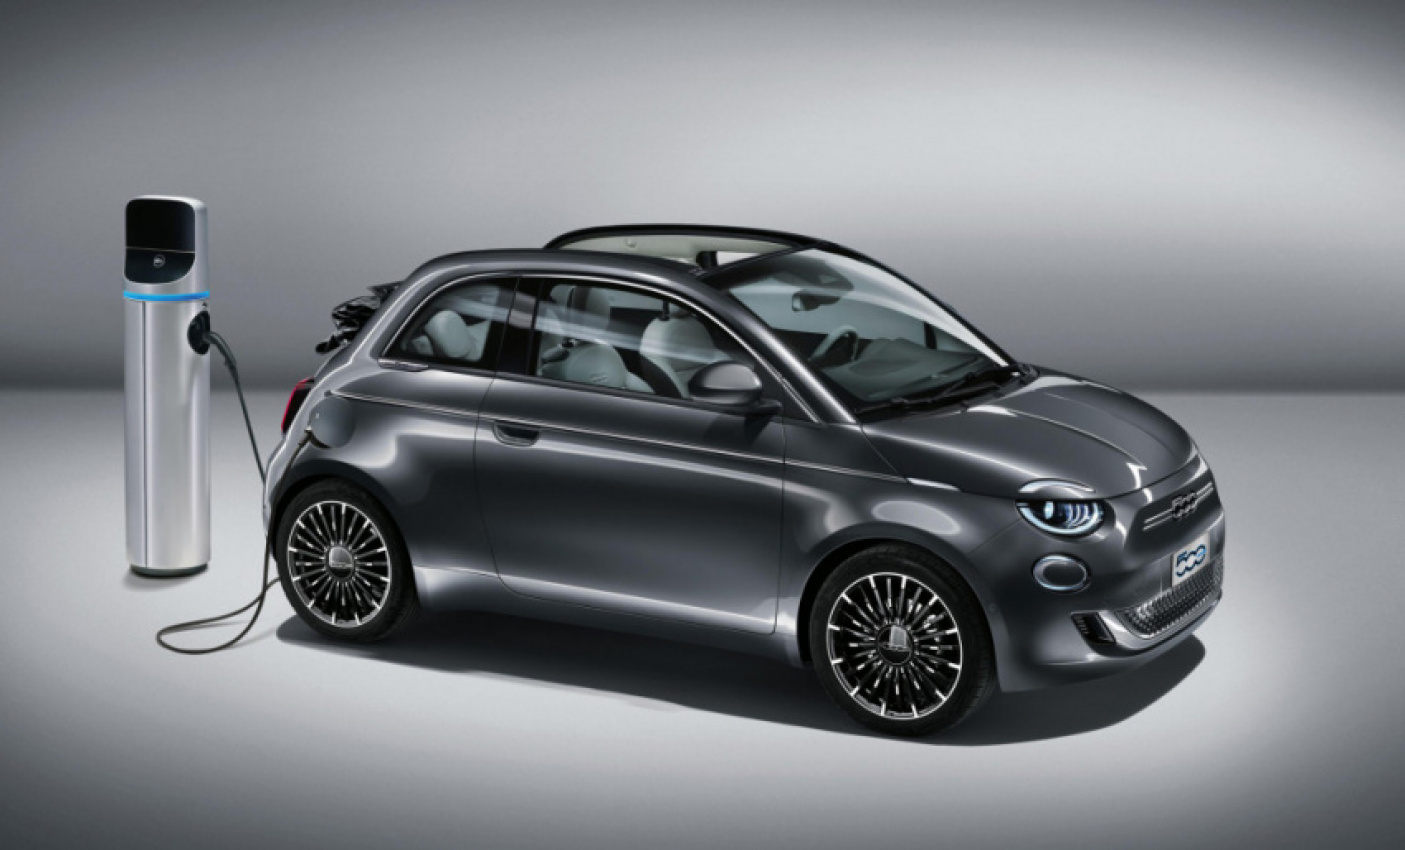 autos, cars, fiat, abarth, electric cars, fiat 500 news, fiat news, hatchbacks, news, performance, hot fiat 500 will reportedly be abarth's first ev